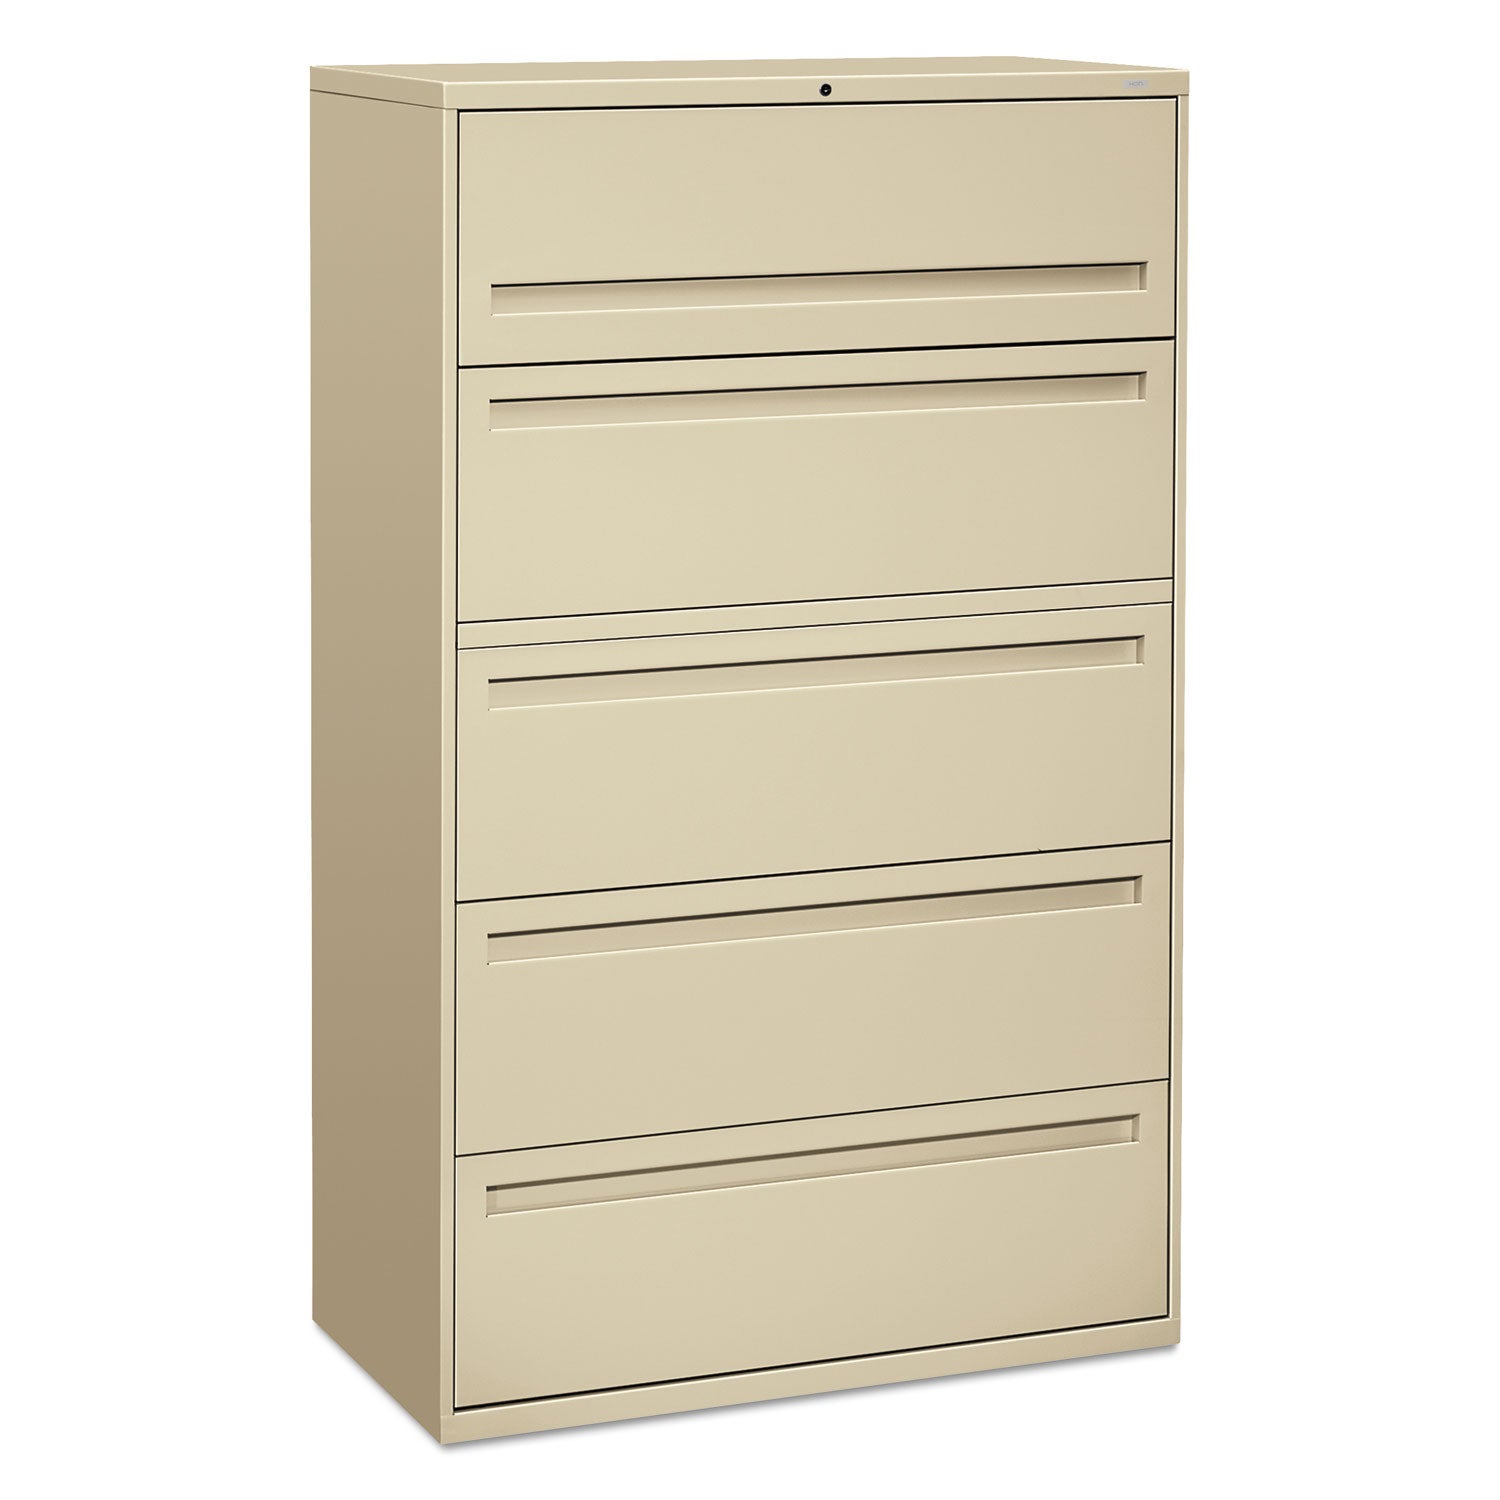 Brigade 700 Series Lateral File, 4 Legal/Letter-Size File Drawers, 1 File Shelf, 1 Post Shelf, Putty, 42" x 18" x 64.25 - 